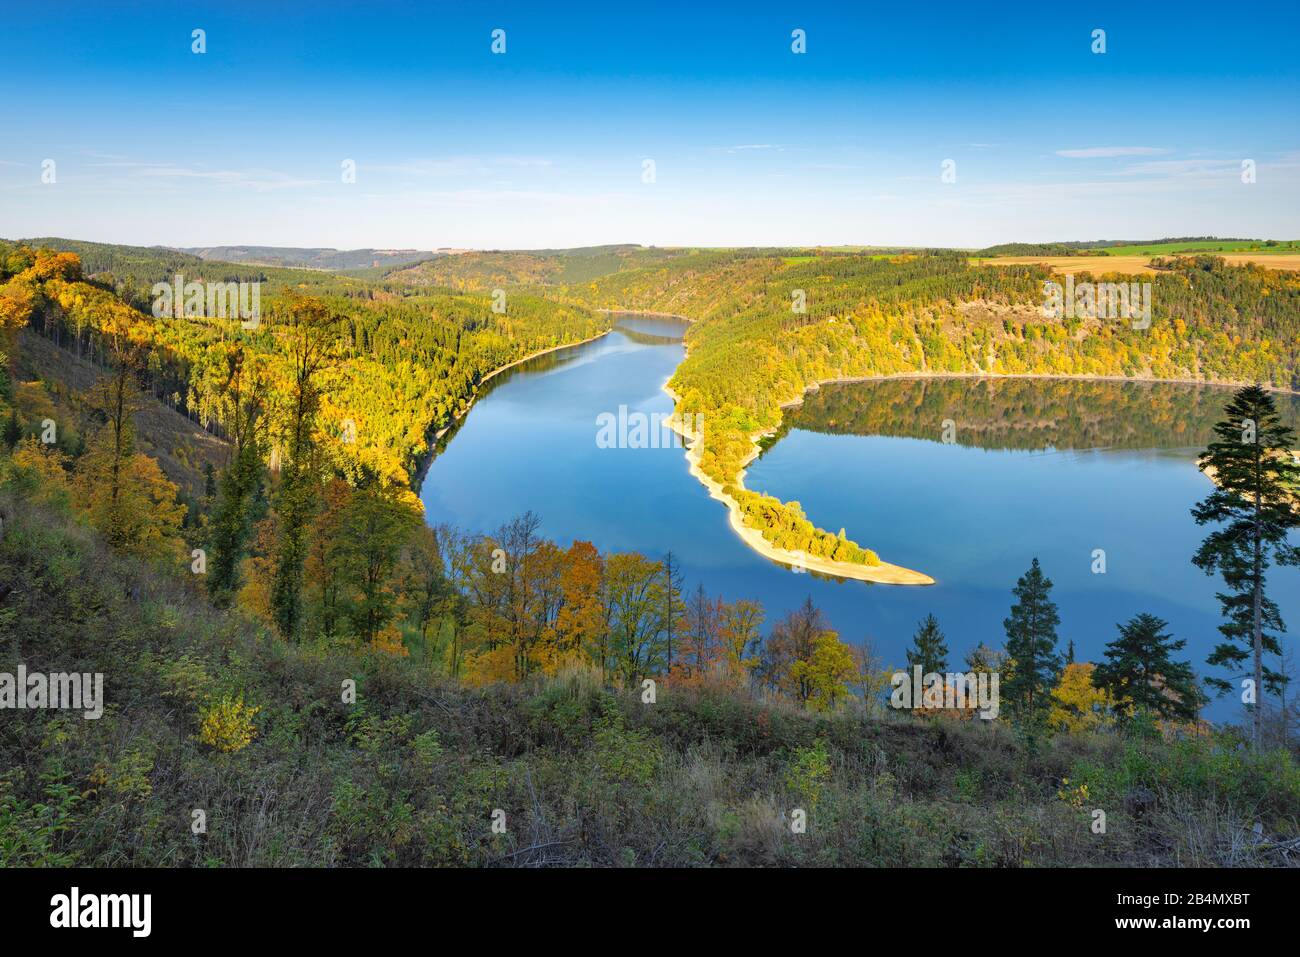 Germany, Thuringia, Thuringian Slate Mountains Nature Park, Upper Saale, view of the Hohenwarte reservoir in autumn Stock Photo